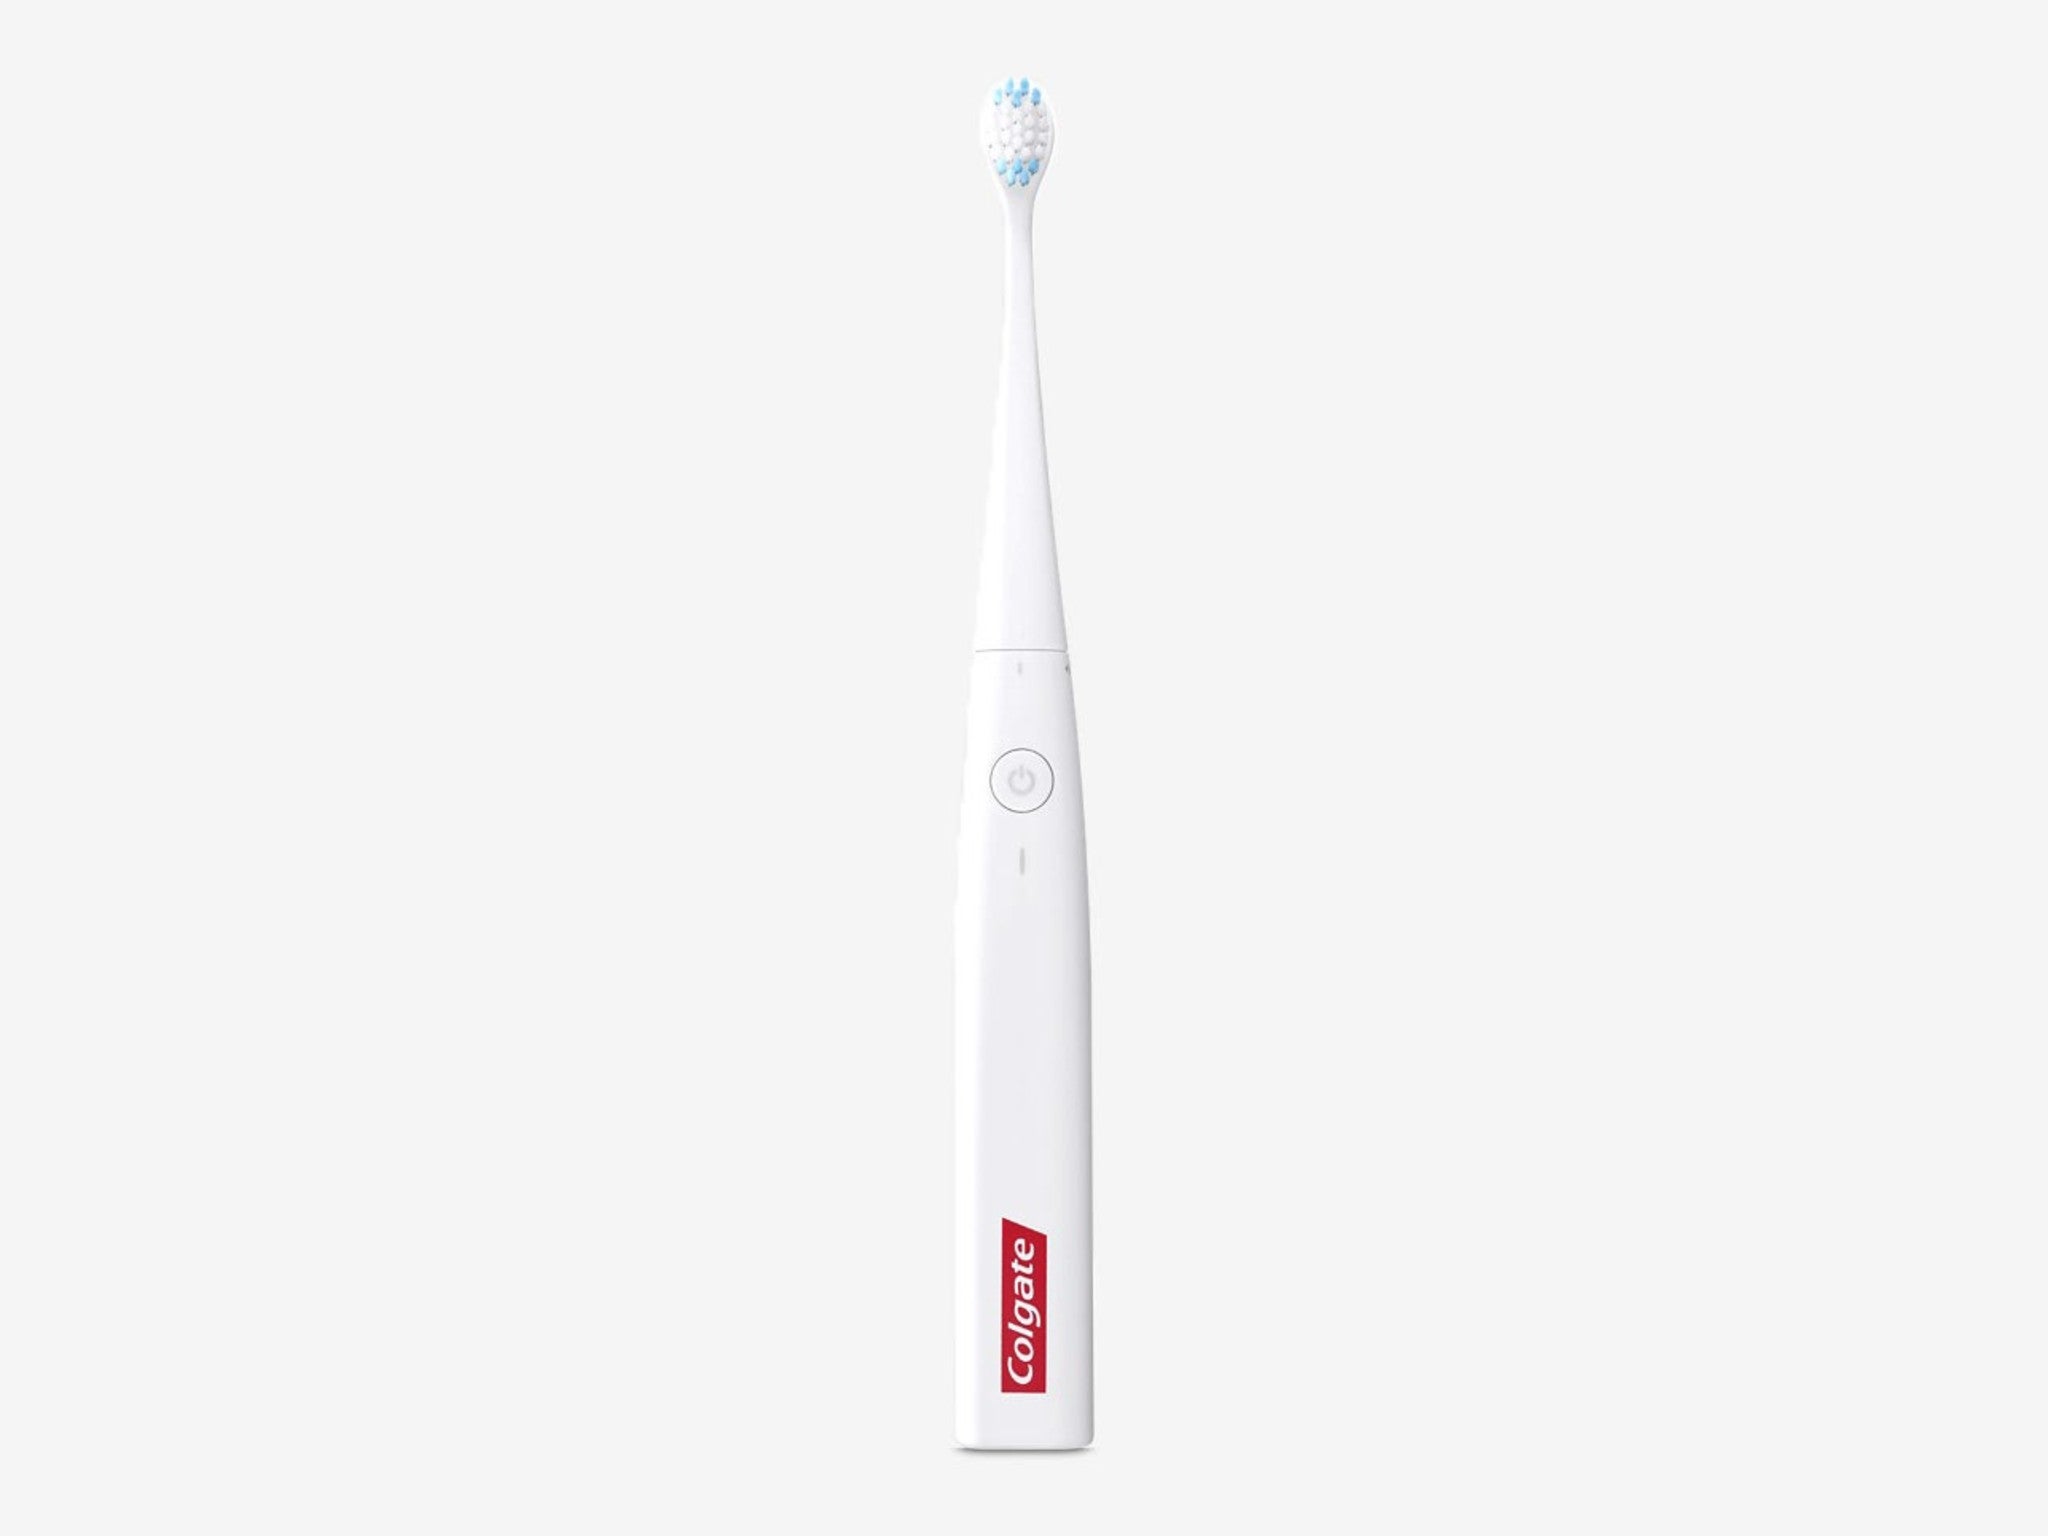 Colgate smart electronic toothbrush E1 indybest.jpeg